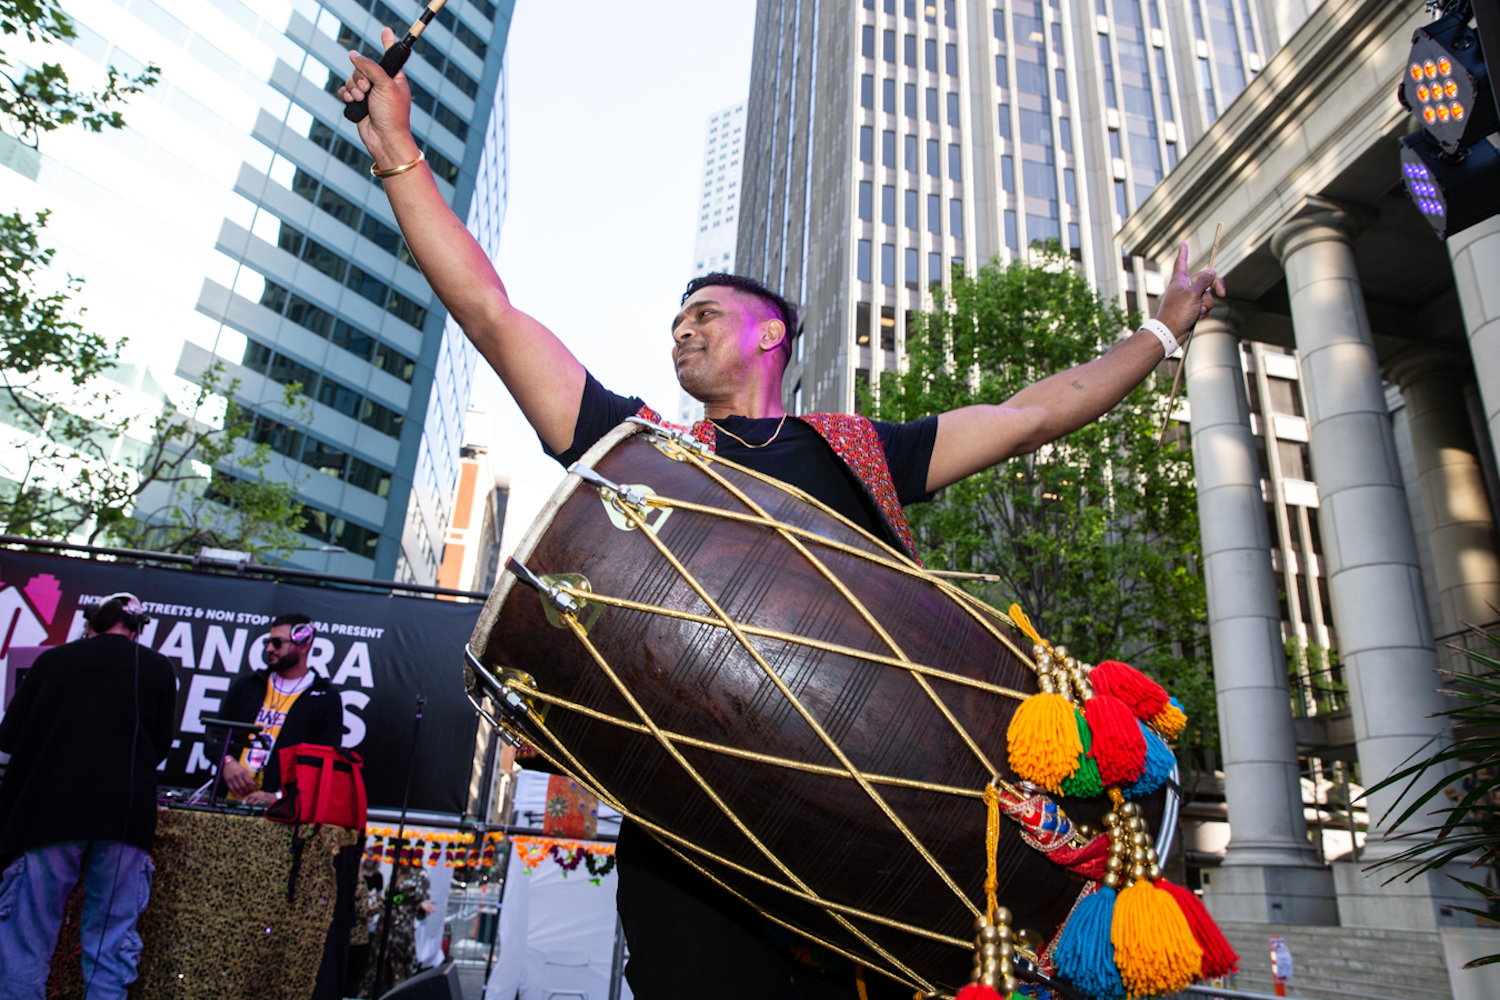 a man playing a giant drum outside with tassels hanging from it